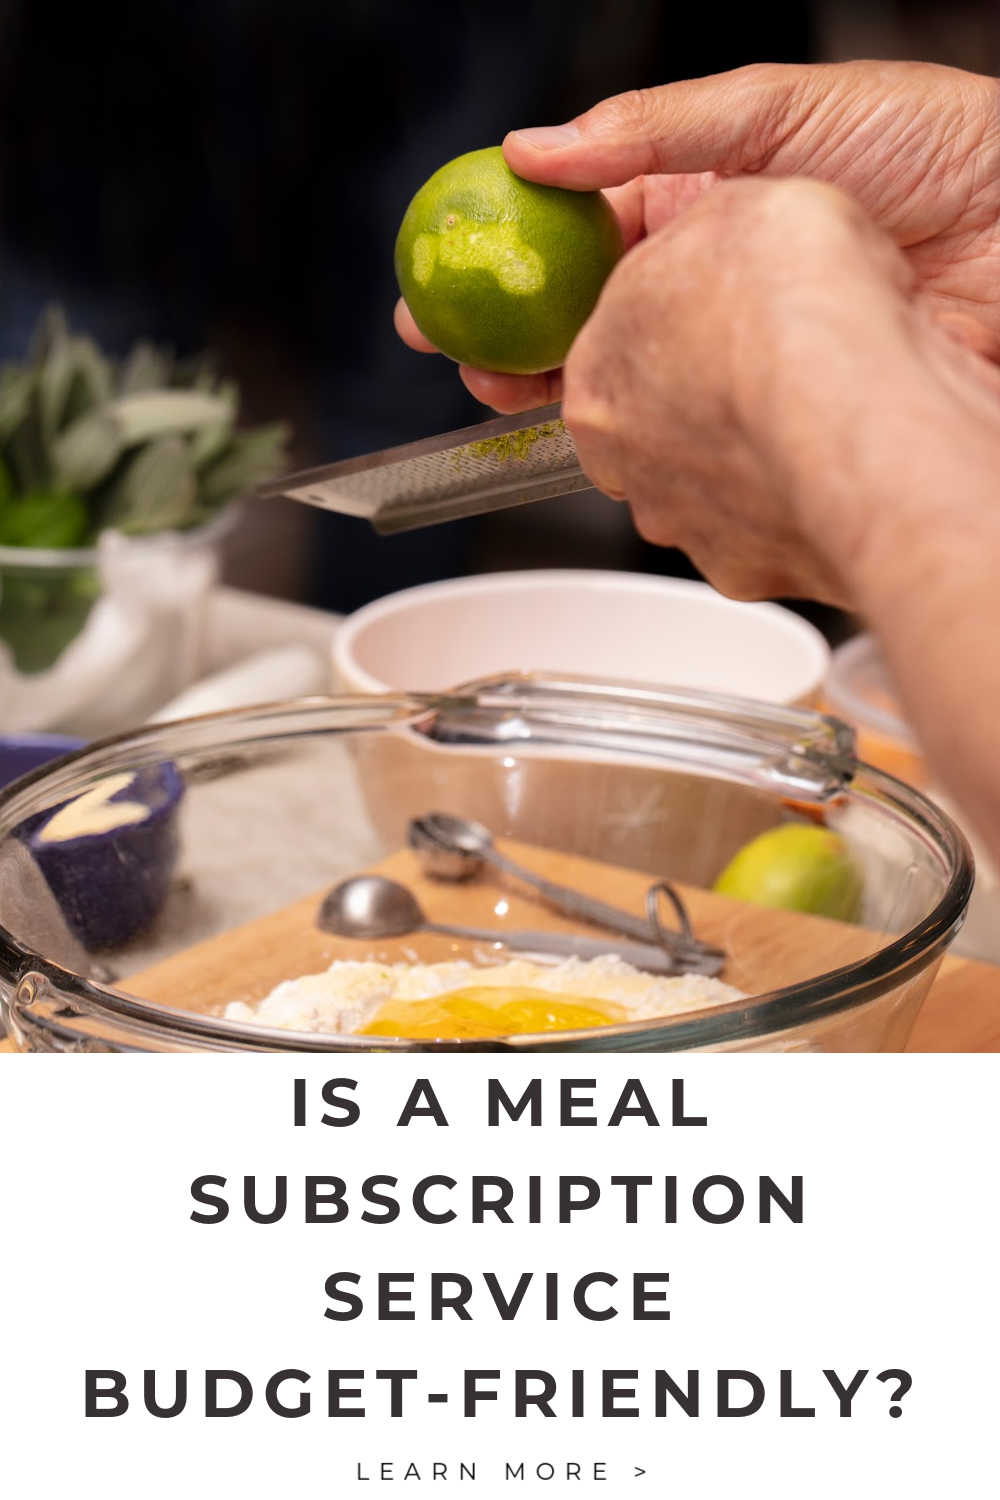 MEAL SUBSCRIPTION